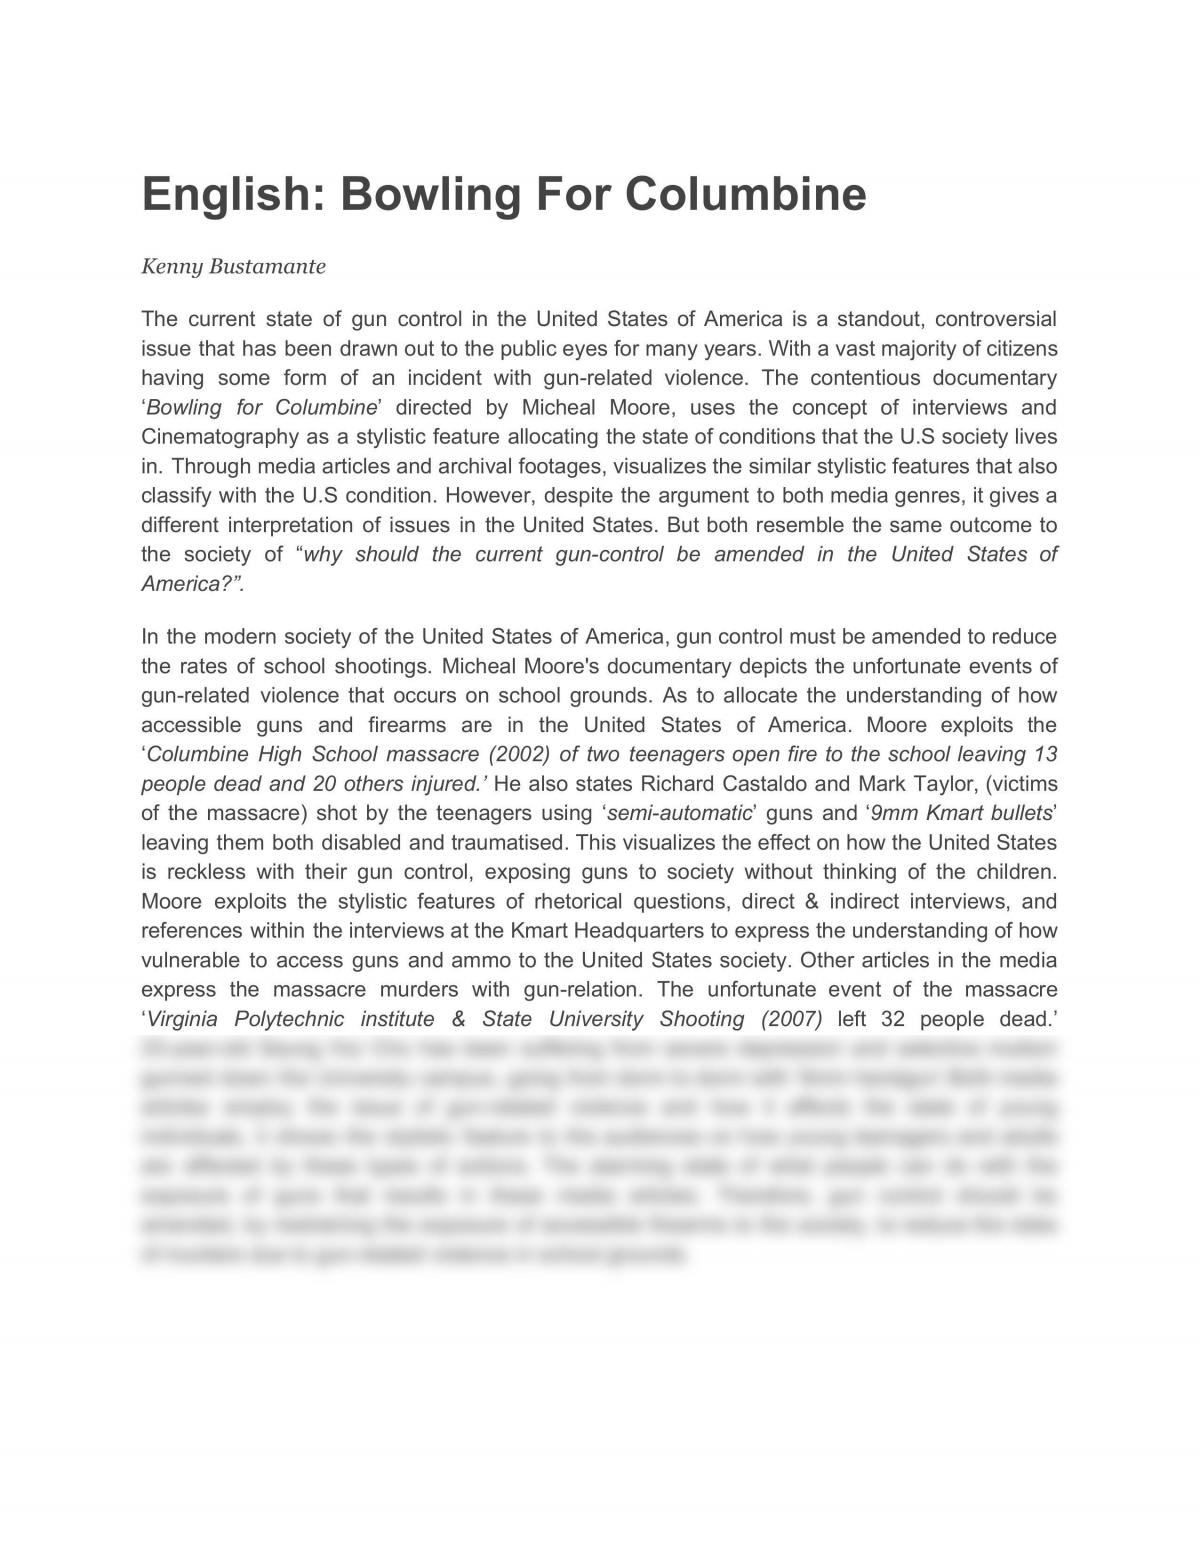 bowling for columbine essay conclusion